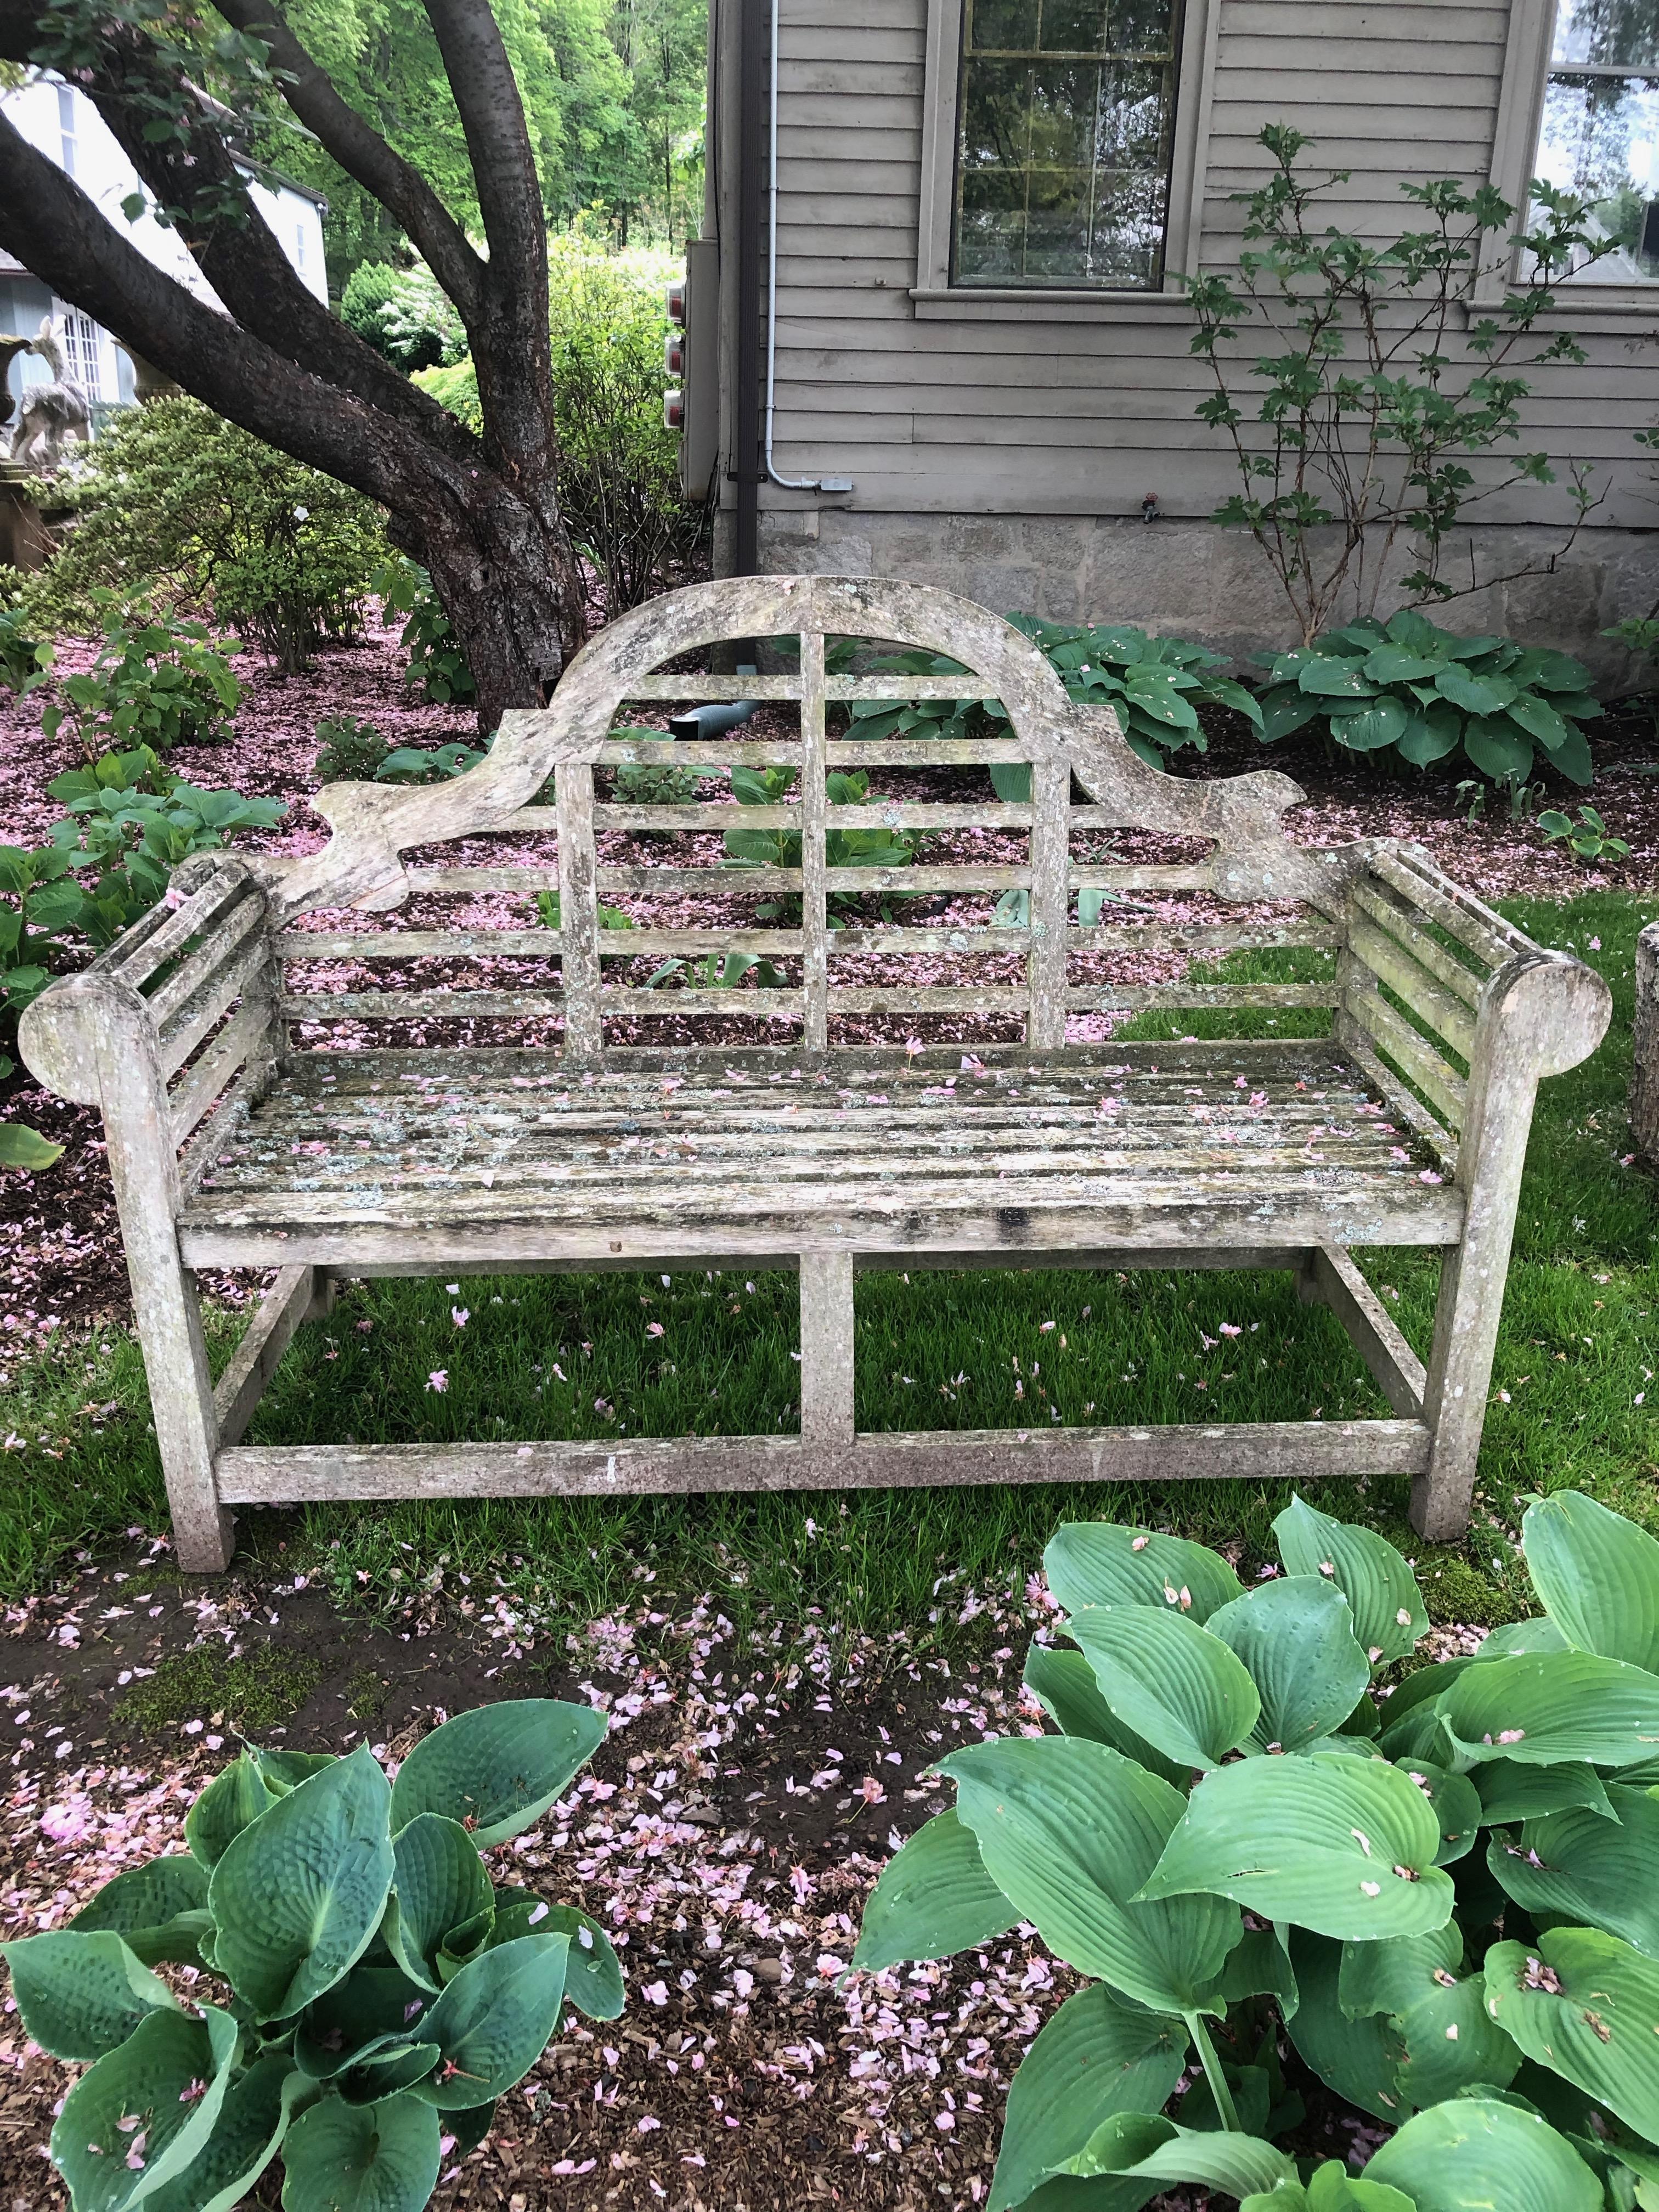 Elegant and classical without being fussy, Lutyens benches are always a hit with our clients. Perfect in a formal garden or up against a simple green hedge, and originally designed by Sir Edwin Lutyens in 1910, these are particularly notable for